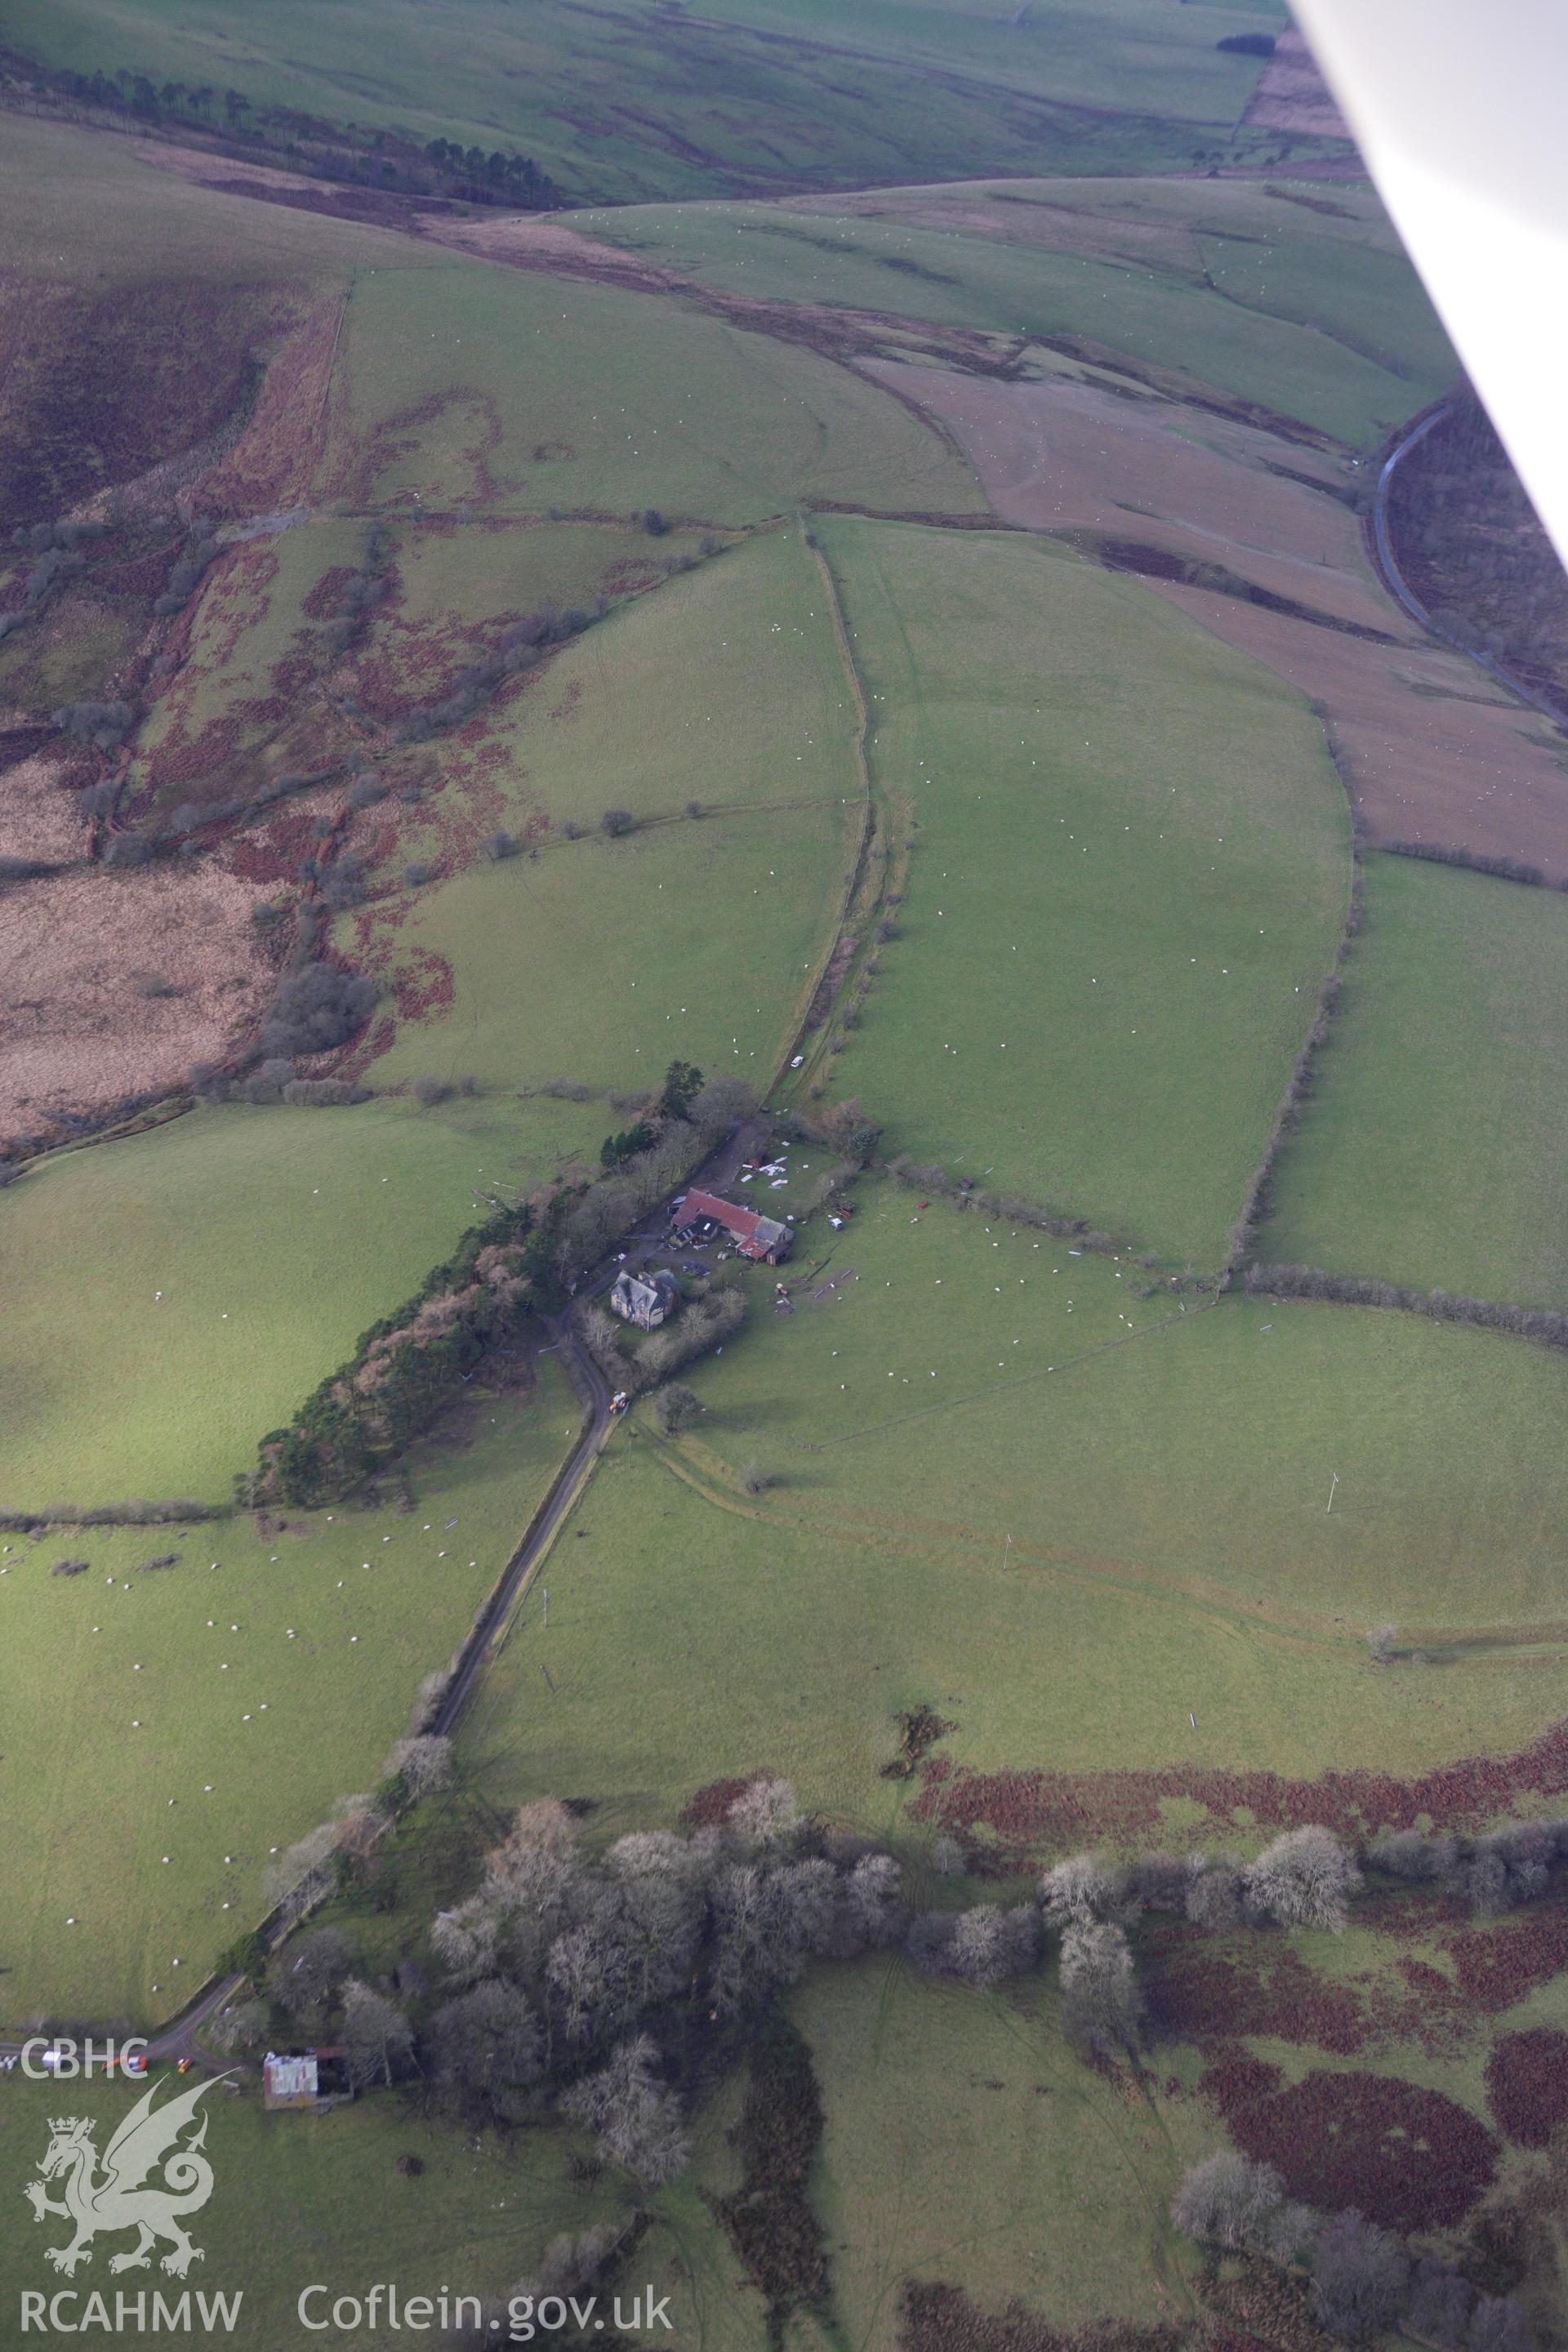 RCAHMW colour oblique aerial photograph of a section of the Monk's Trod from Abbey Cwm Hir to Park and Moel Hywel. Taken on 10 December 2009 by Toby Driver